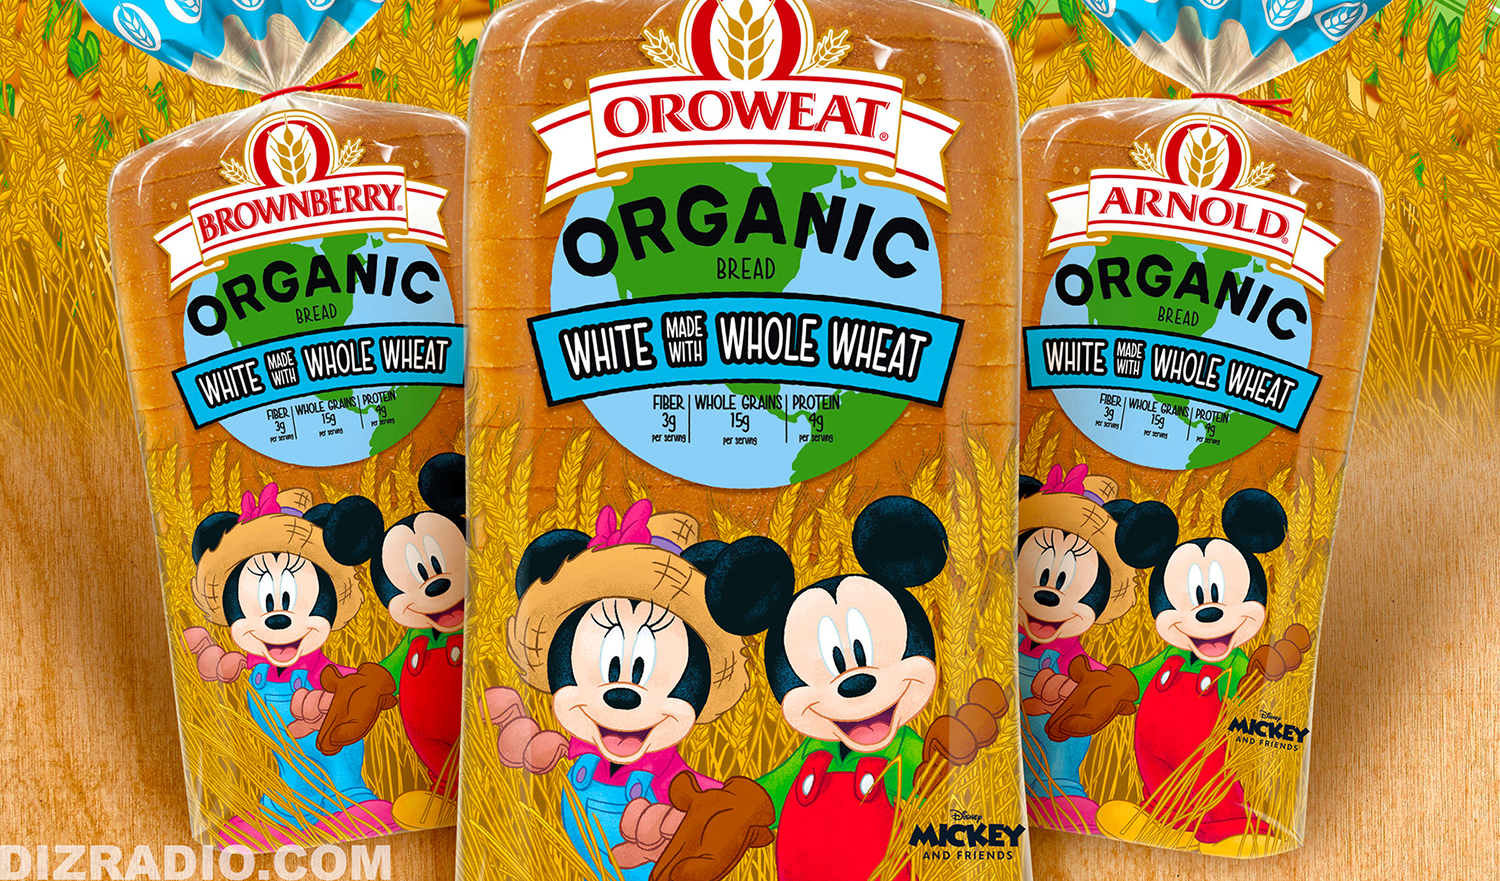 Arnold, Brownberry And Oroweat Organic Breads Collaborate with Disney to Debut New Organic Bread for Kids